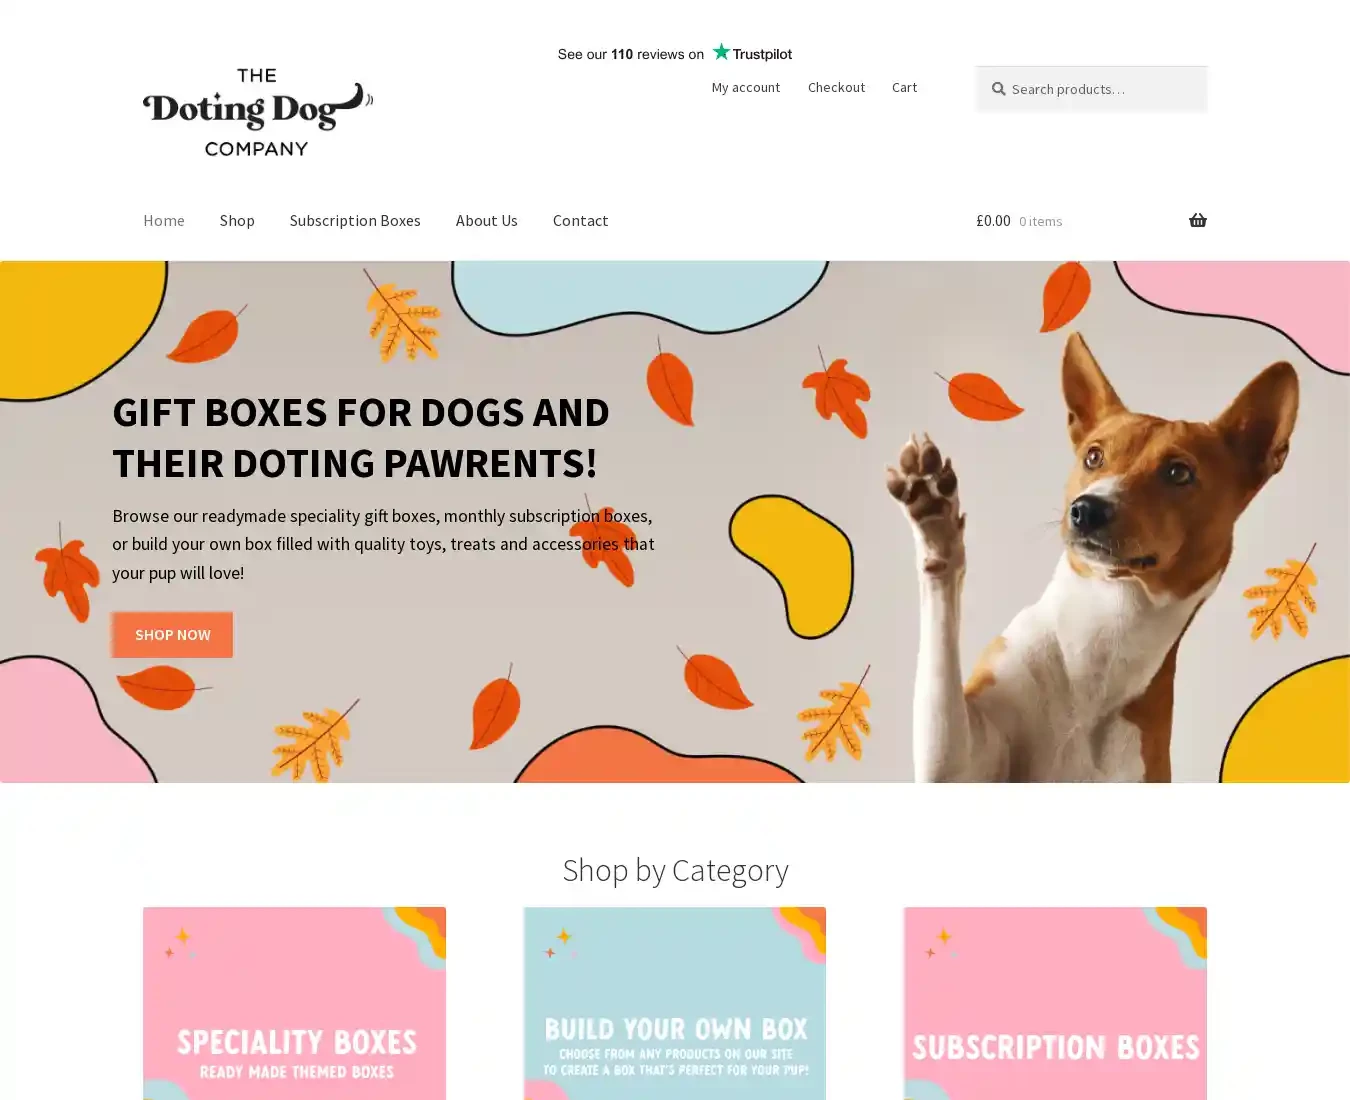 thedotingdogcompany.co.uk, read genuine and honest customer reviews, share your own experience with others.